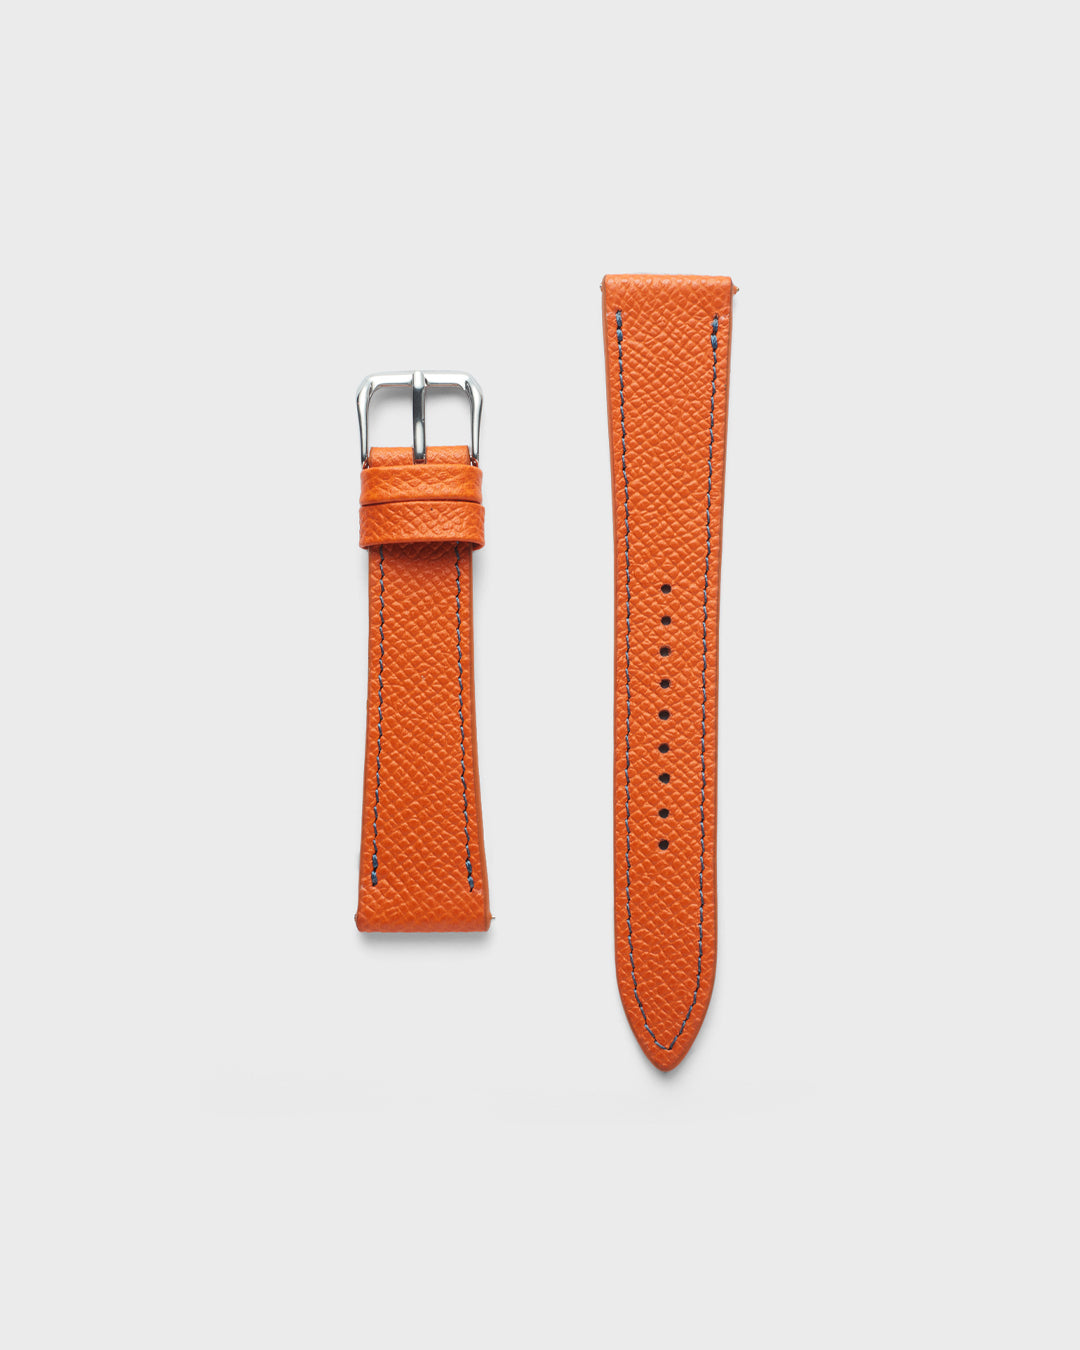 INTRO STRAP - FOR QUARTZ, MECHANICAL & SMART WATCHES [Parade Stitch in Italian Epsom Leather] My Store